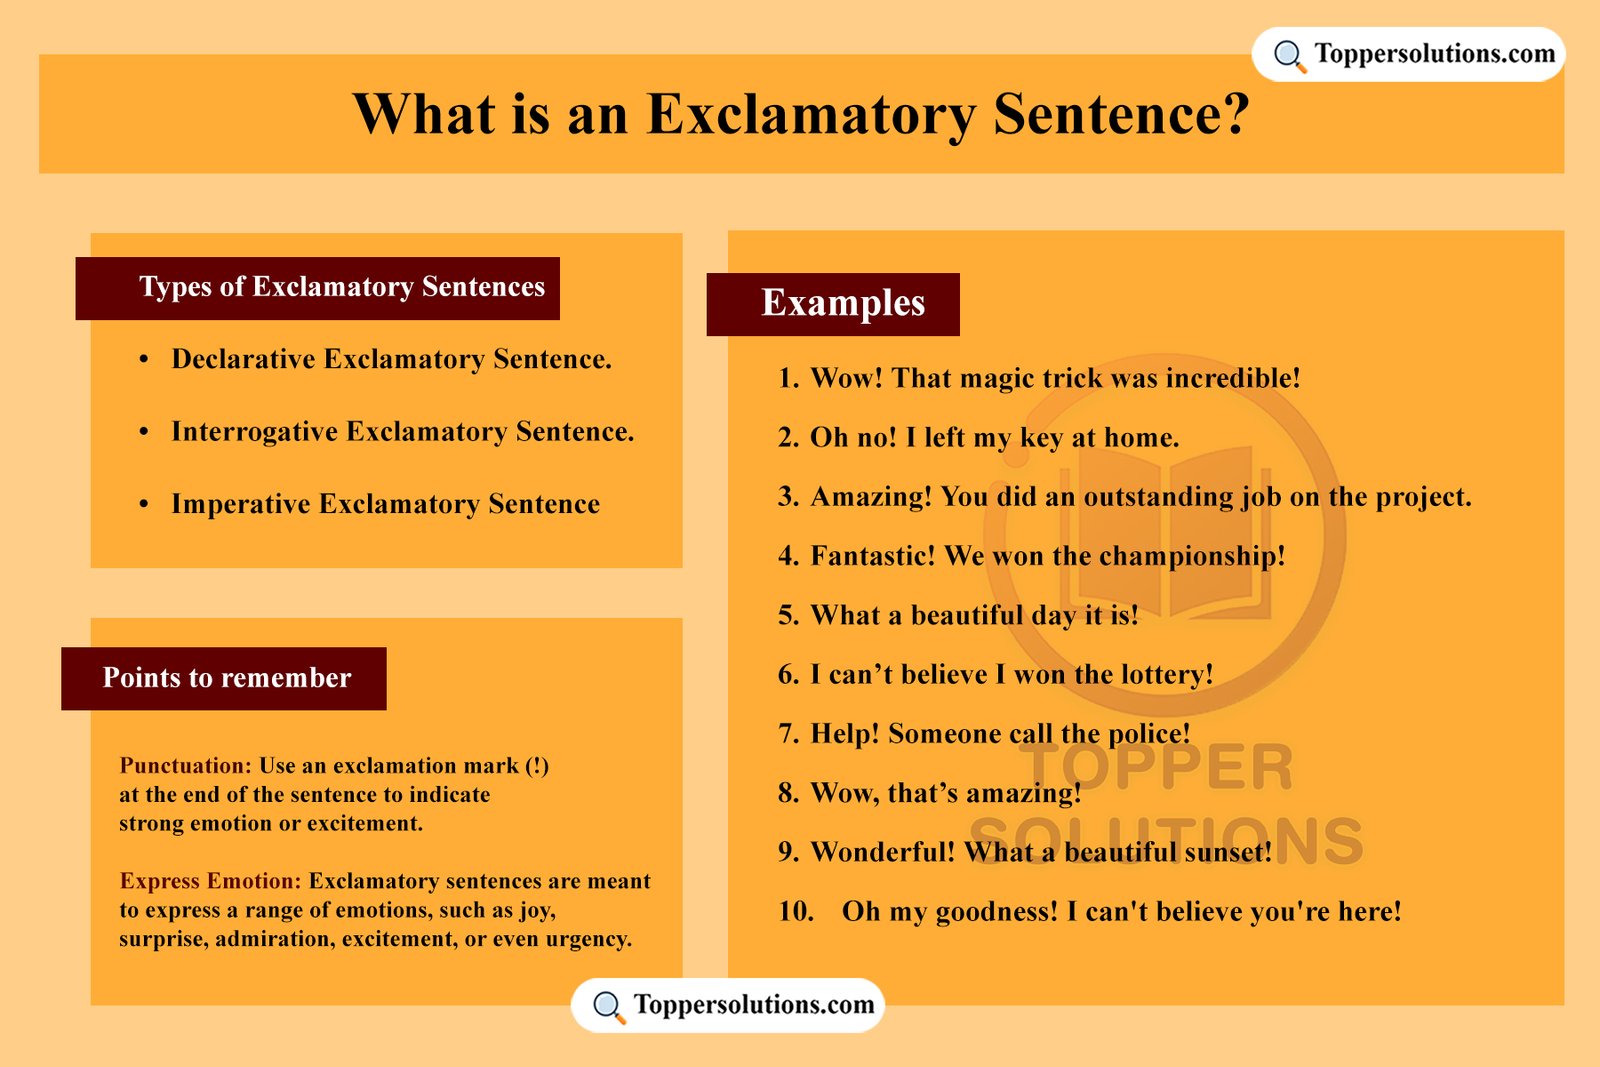 What is an Exclamatory Sentence?